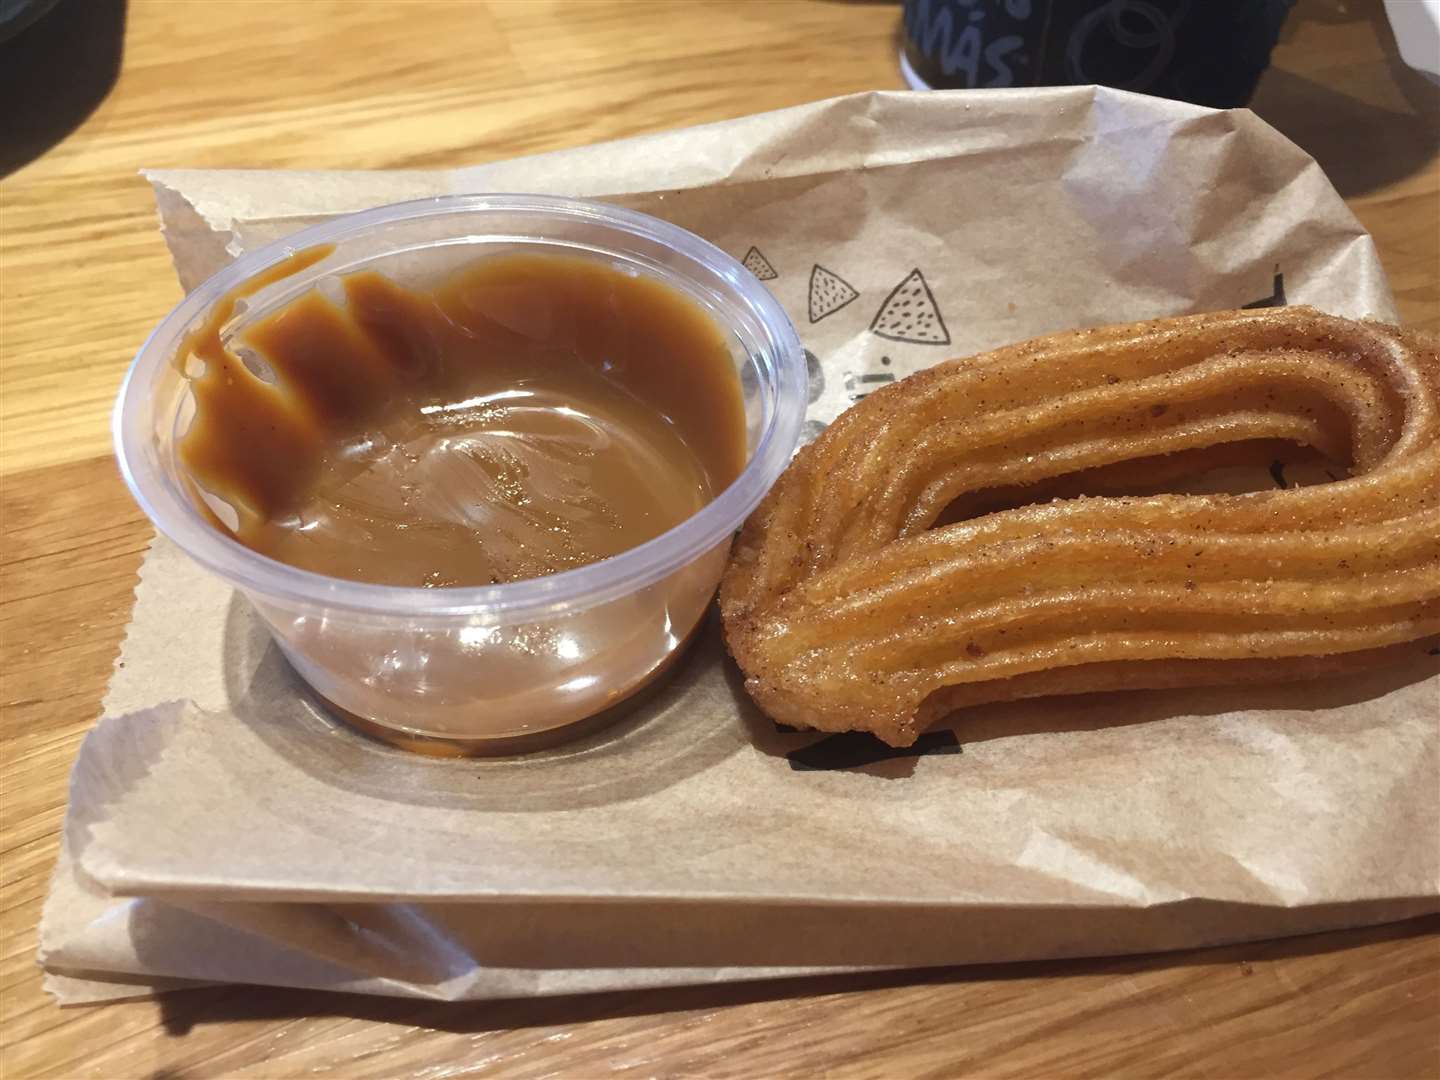 Churros with a caramel dip are £1.39 (I ate one before taking the photo)